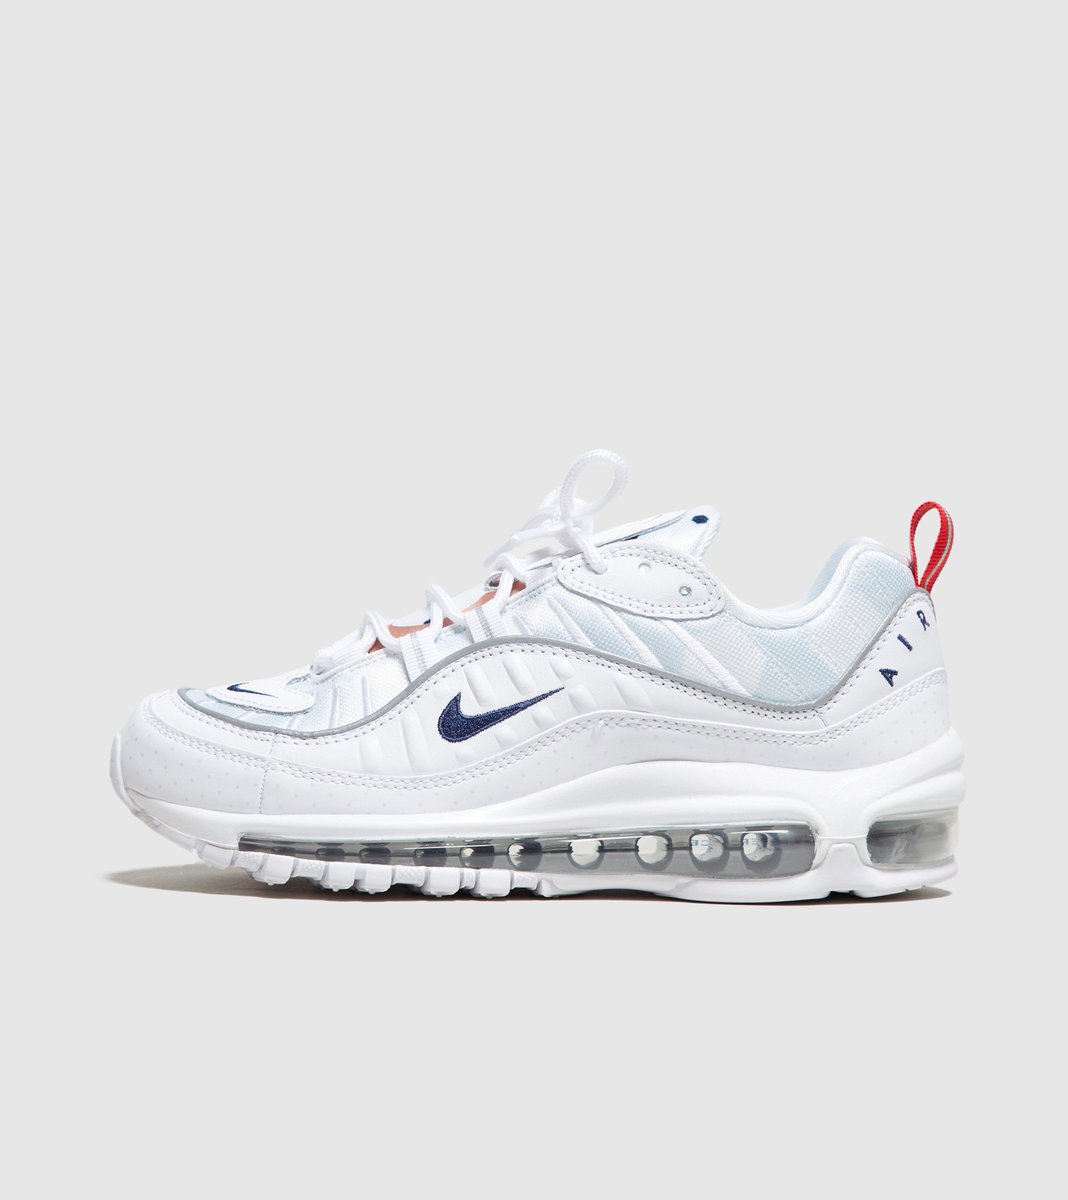 Injusto raqueta Reductor size? on Twitter: "The @Nike Air Max 98 Premium 'Unité Totale'. Available  online and in selected size? stores - #sizeHQ Shop now:  https://t.co/mk0AIRCCfi… https://t.co/OnulrZYaB5"